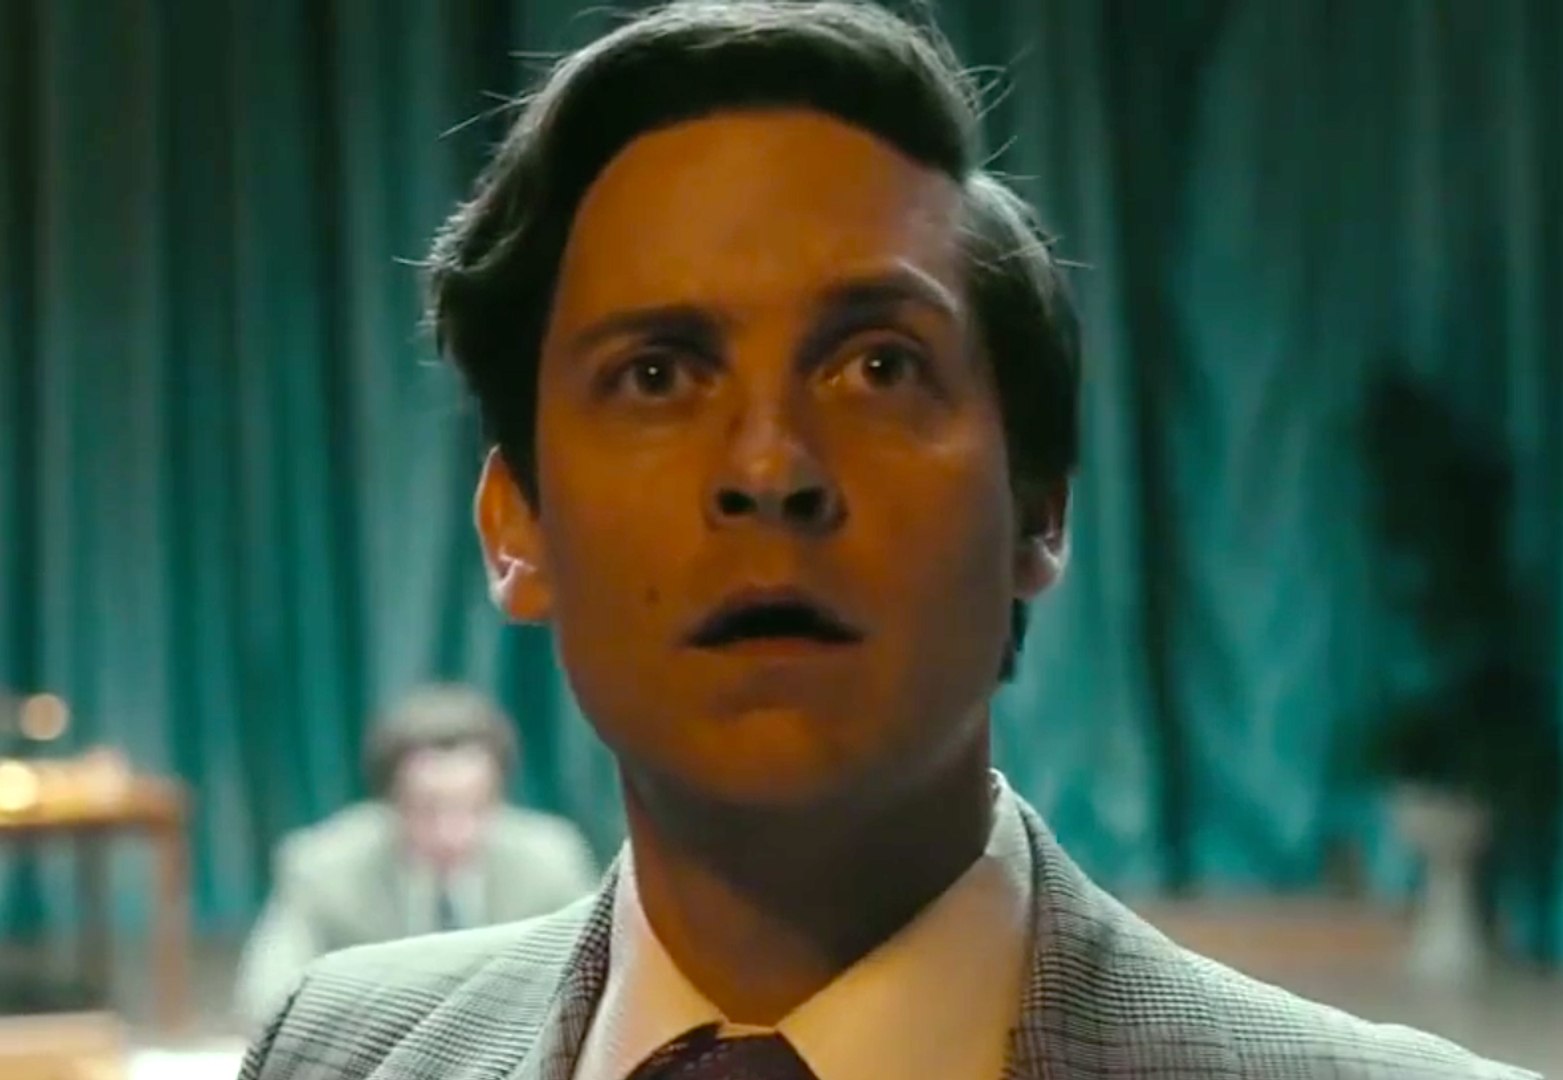 Is Pawn Sacrifice (2014) good? Movie Review - A Good Movie to Watch